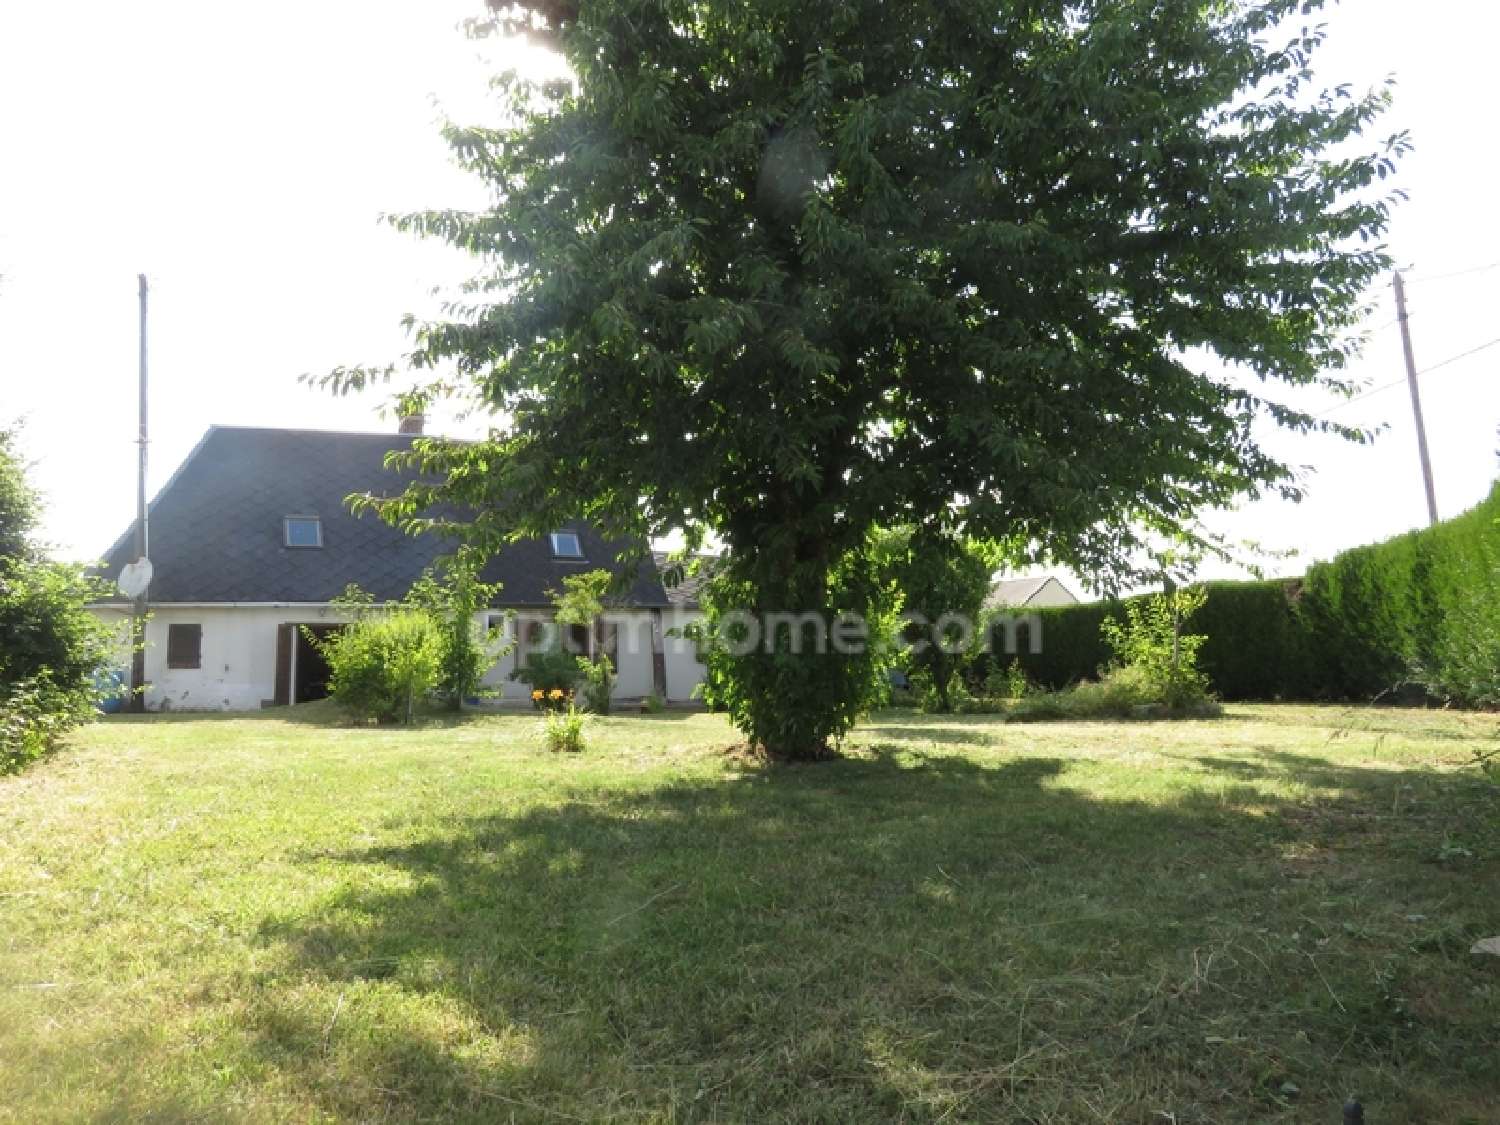  for sale house Conches-en-Ouche Eure 7